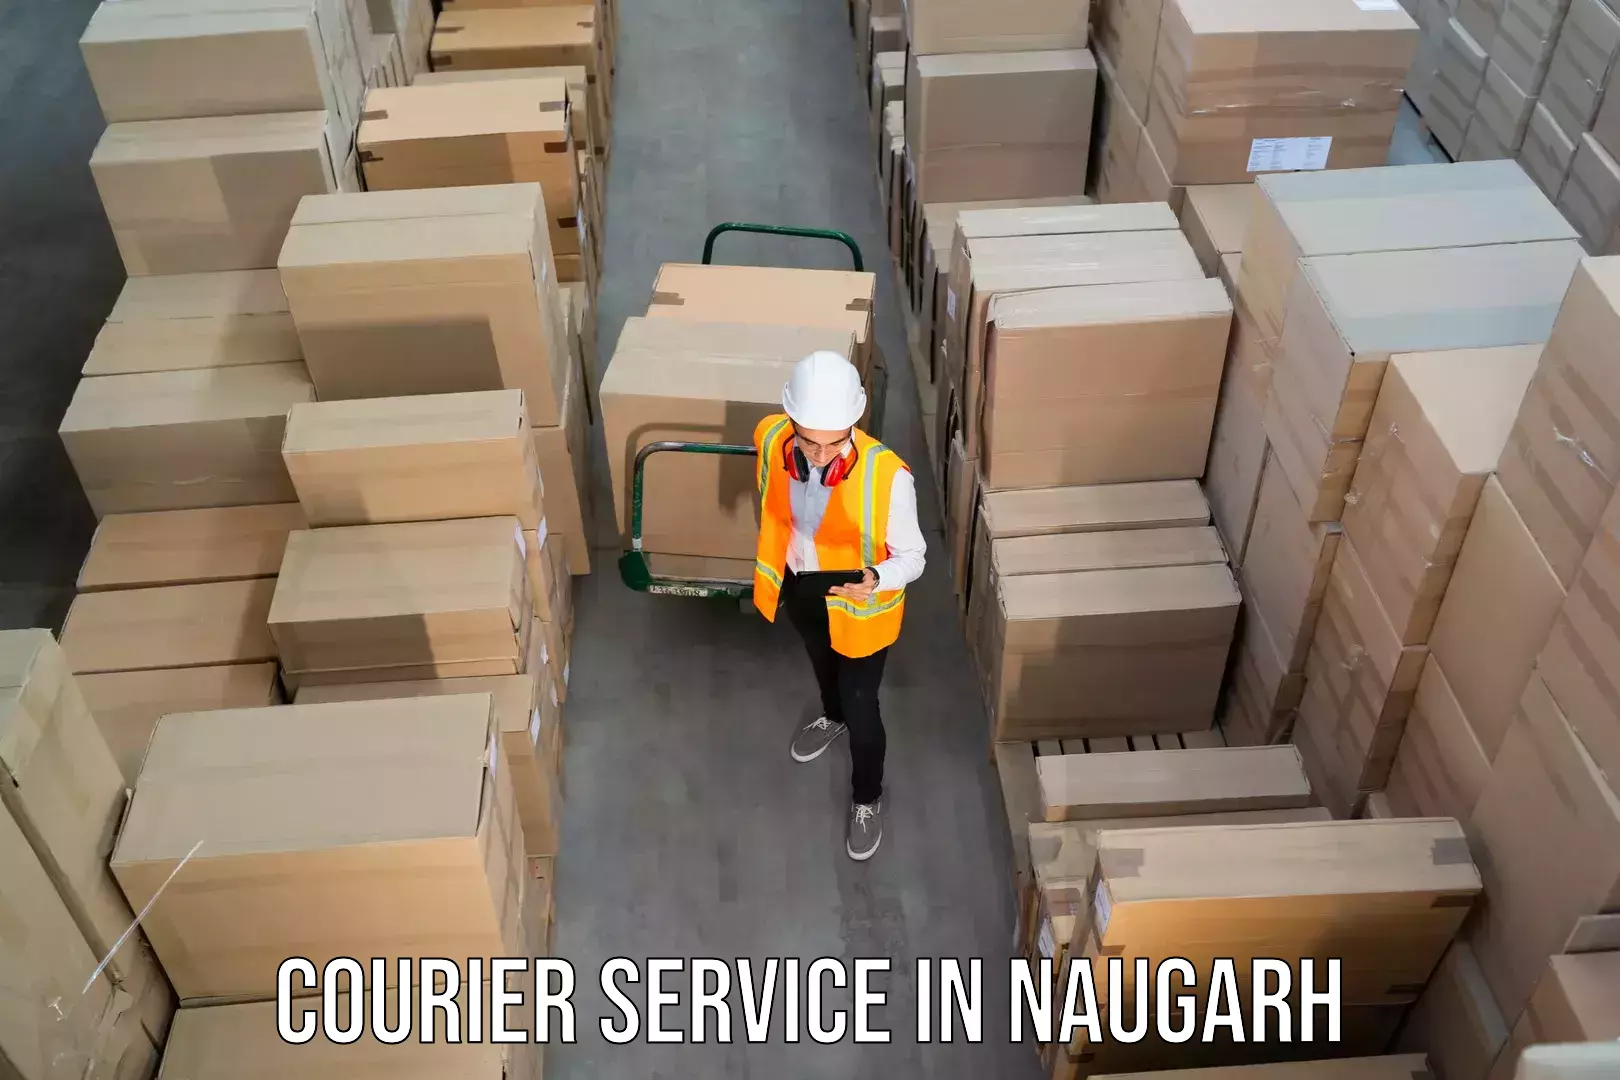 Enhanced delivery experience in Naugarh